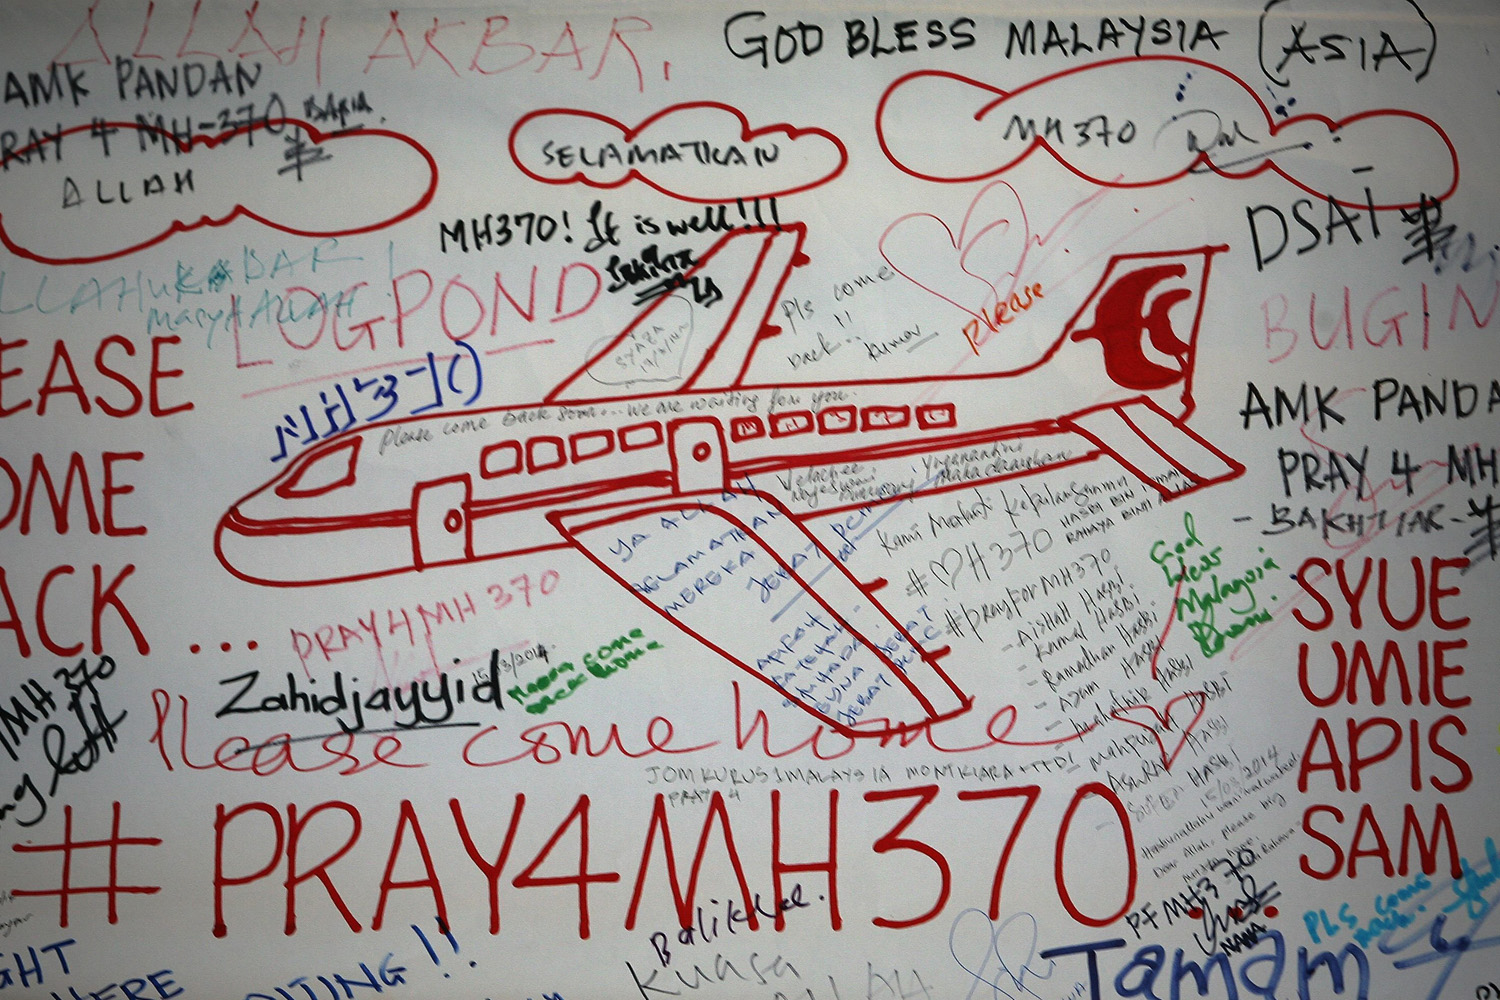 Kuala-Lumpur: Malaysia Airlines flight MH370 messages